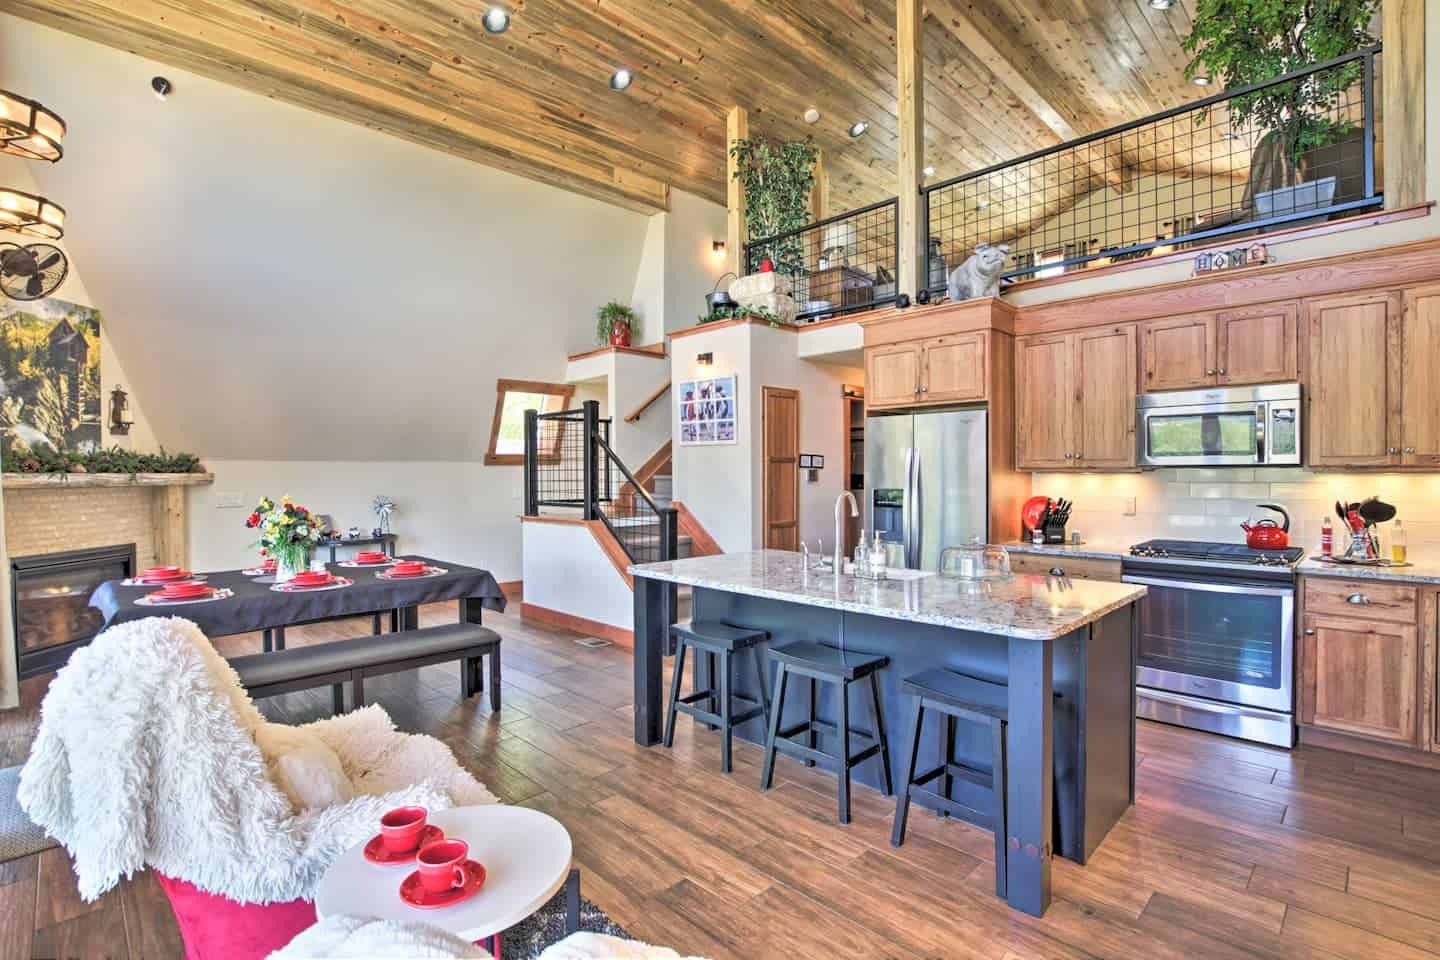 Image of Airbnb rental in Fort Collins, Colorado